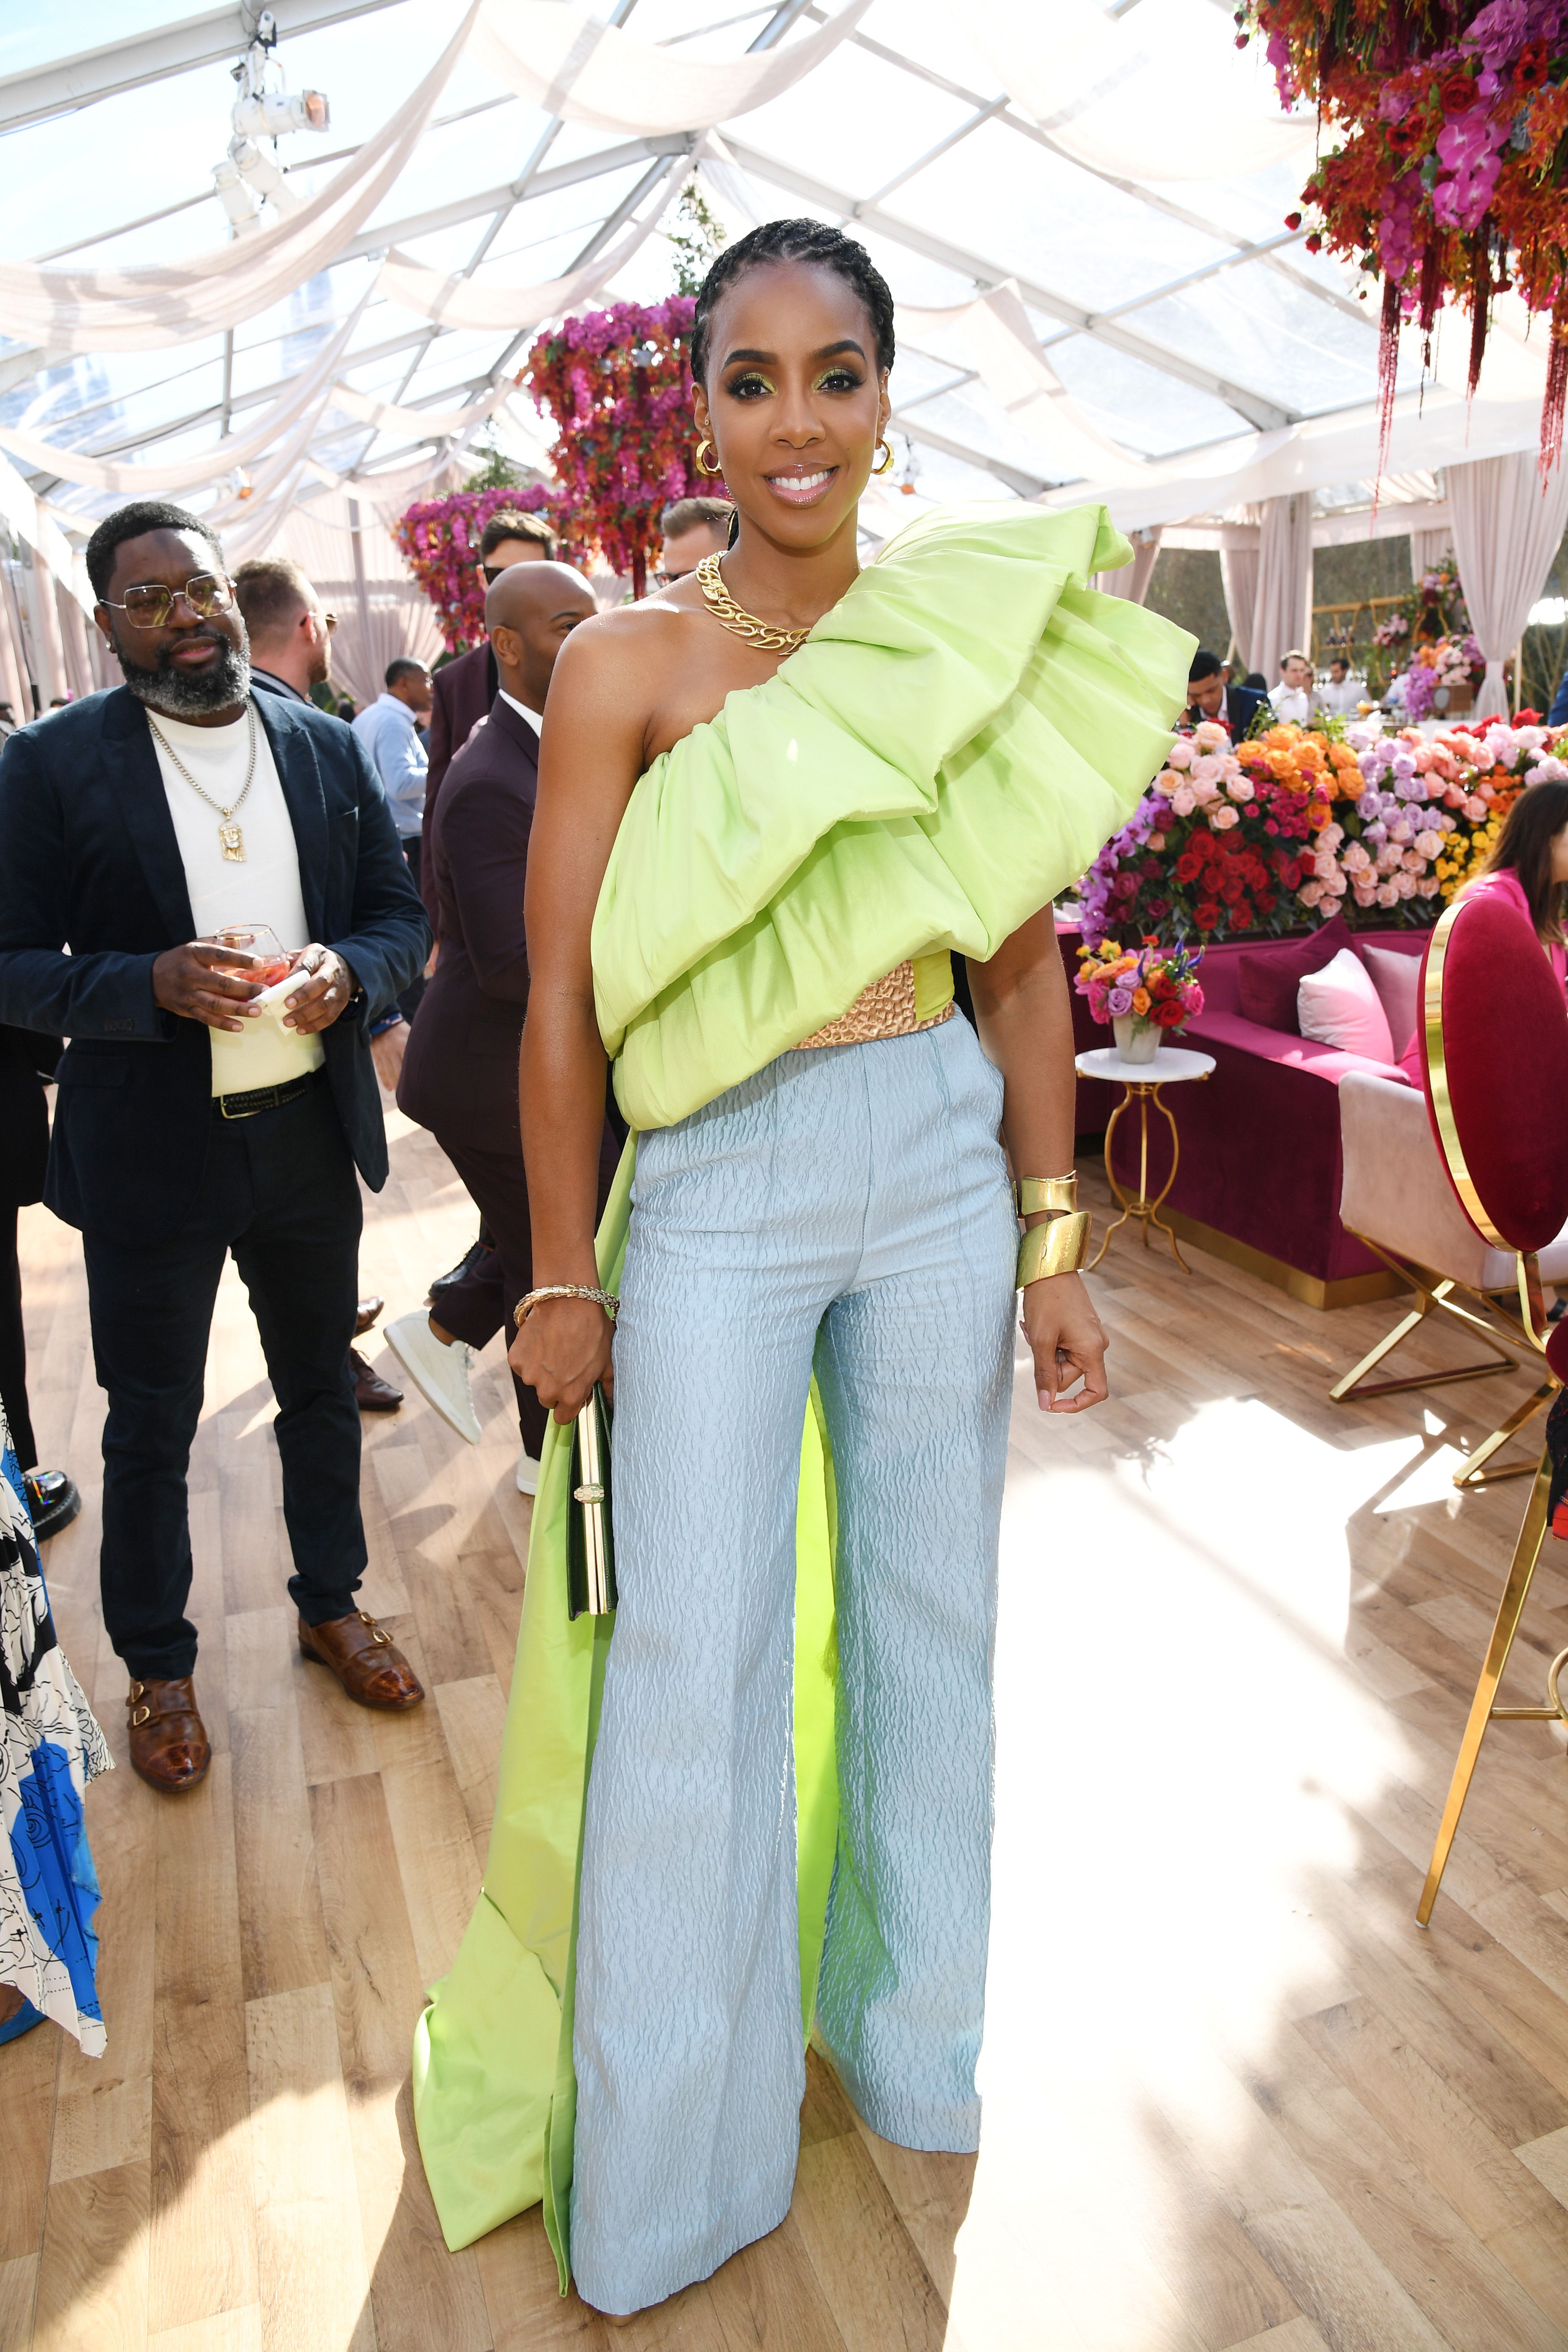 Singer Kelly Rowland at 2020 Roc Nation on January 25, 2020 in Los Angeles.  | Photo: Getty Images